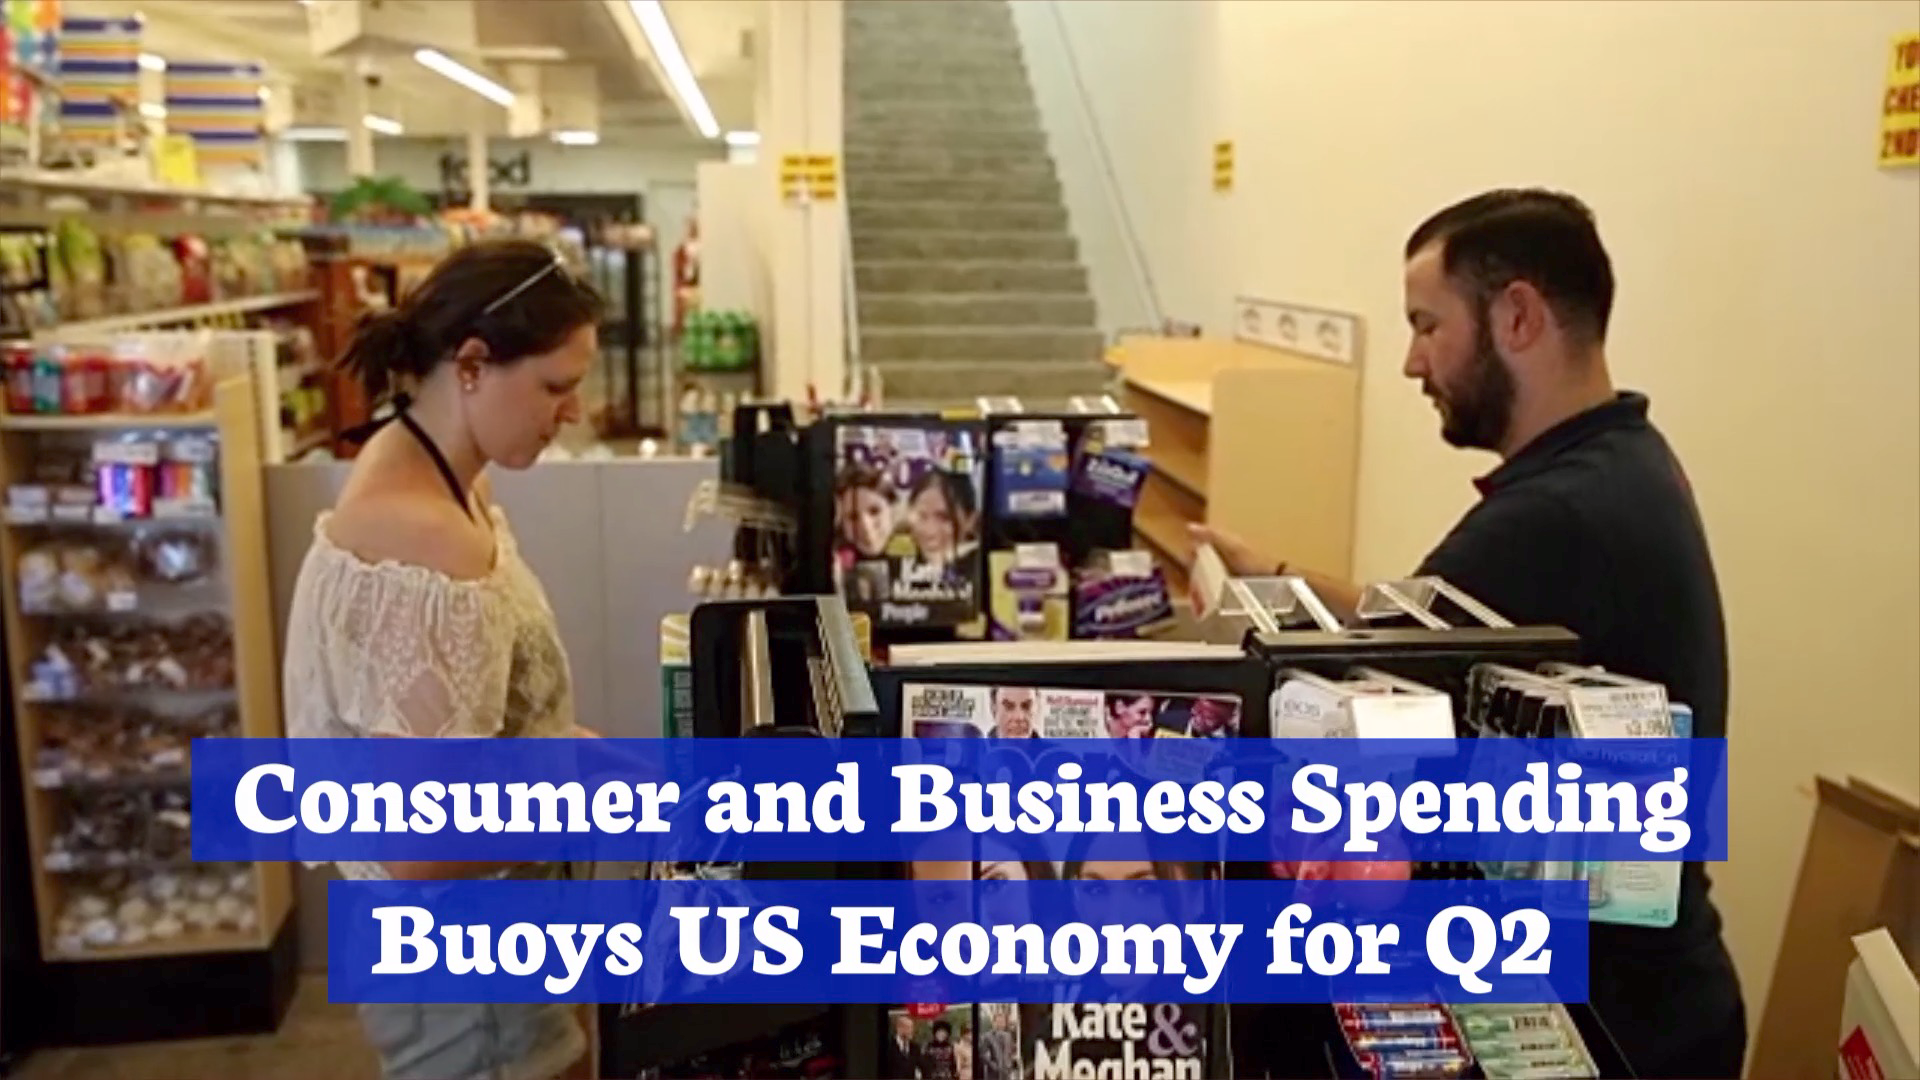 How Was American Spending In Q2 Of 2019